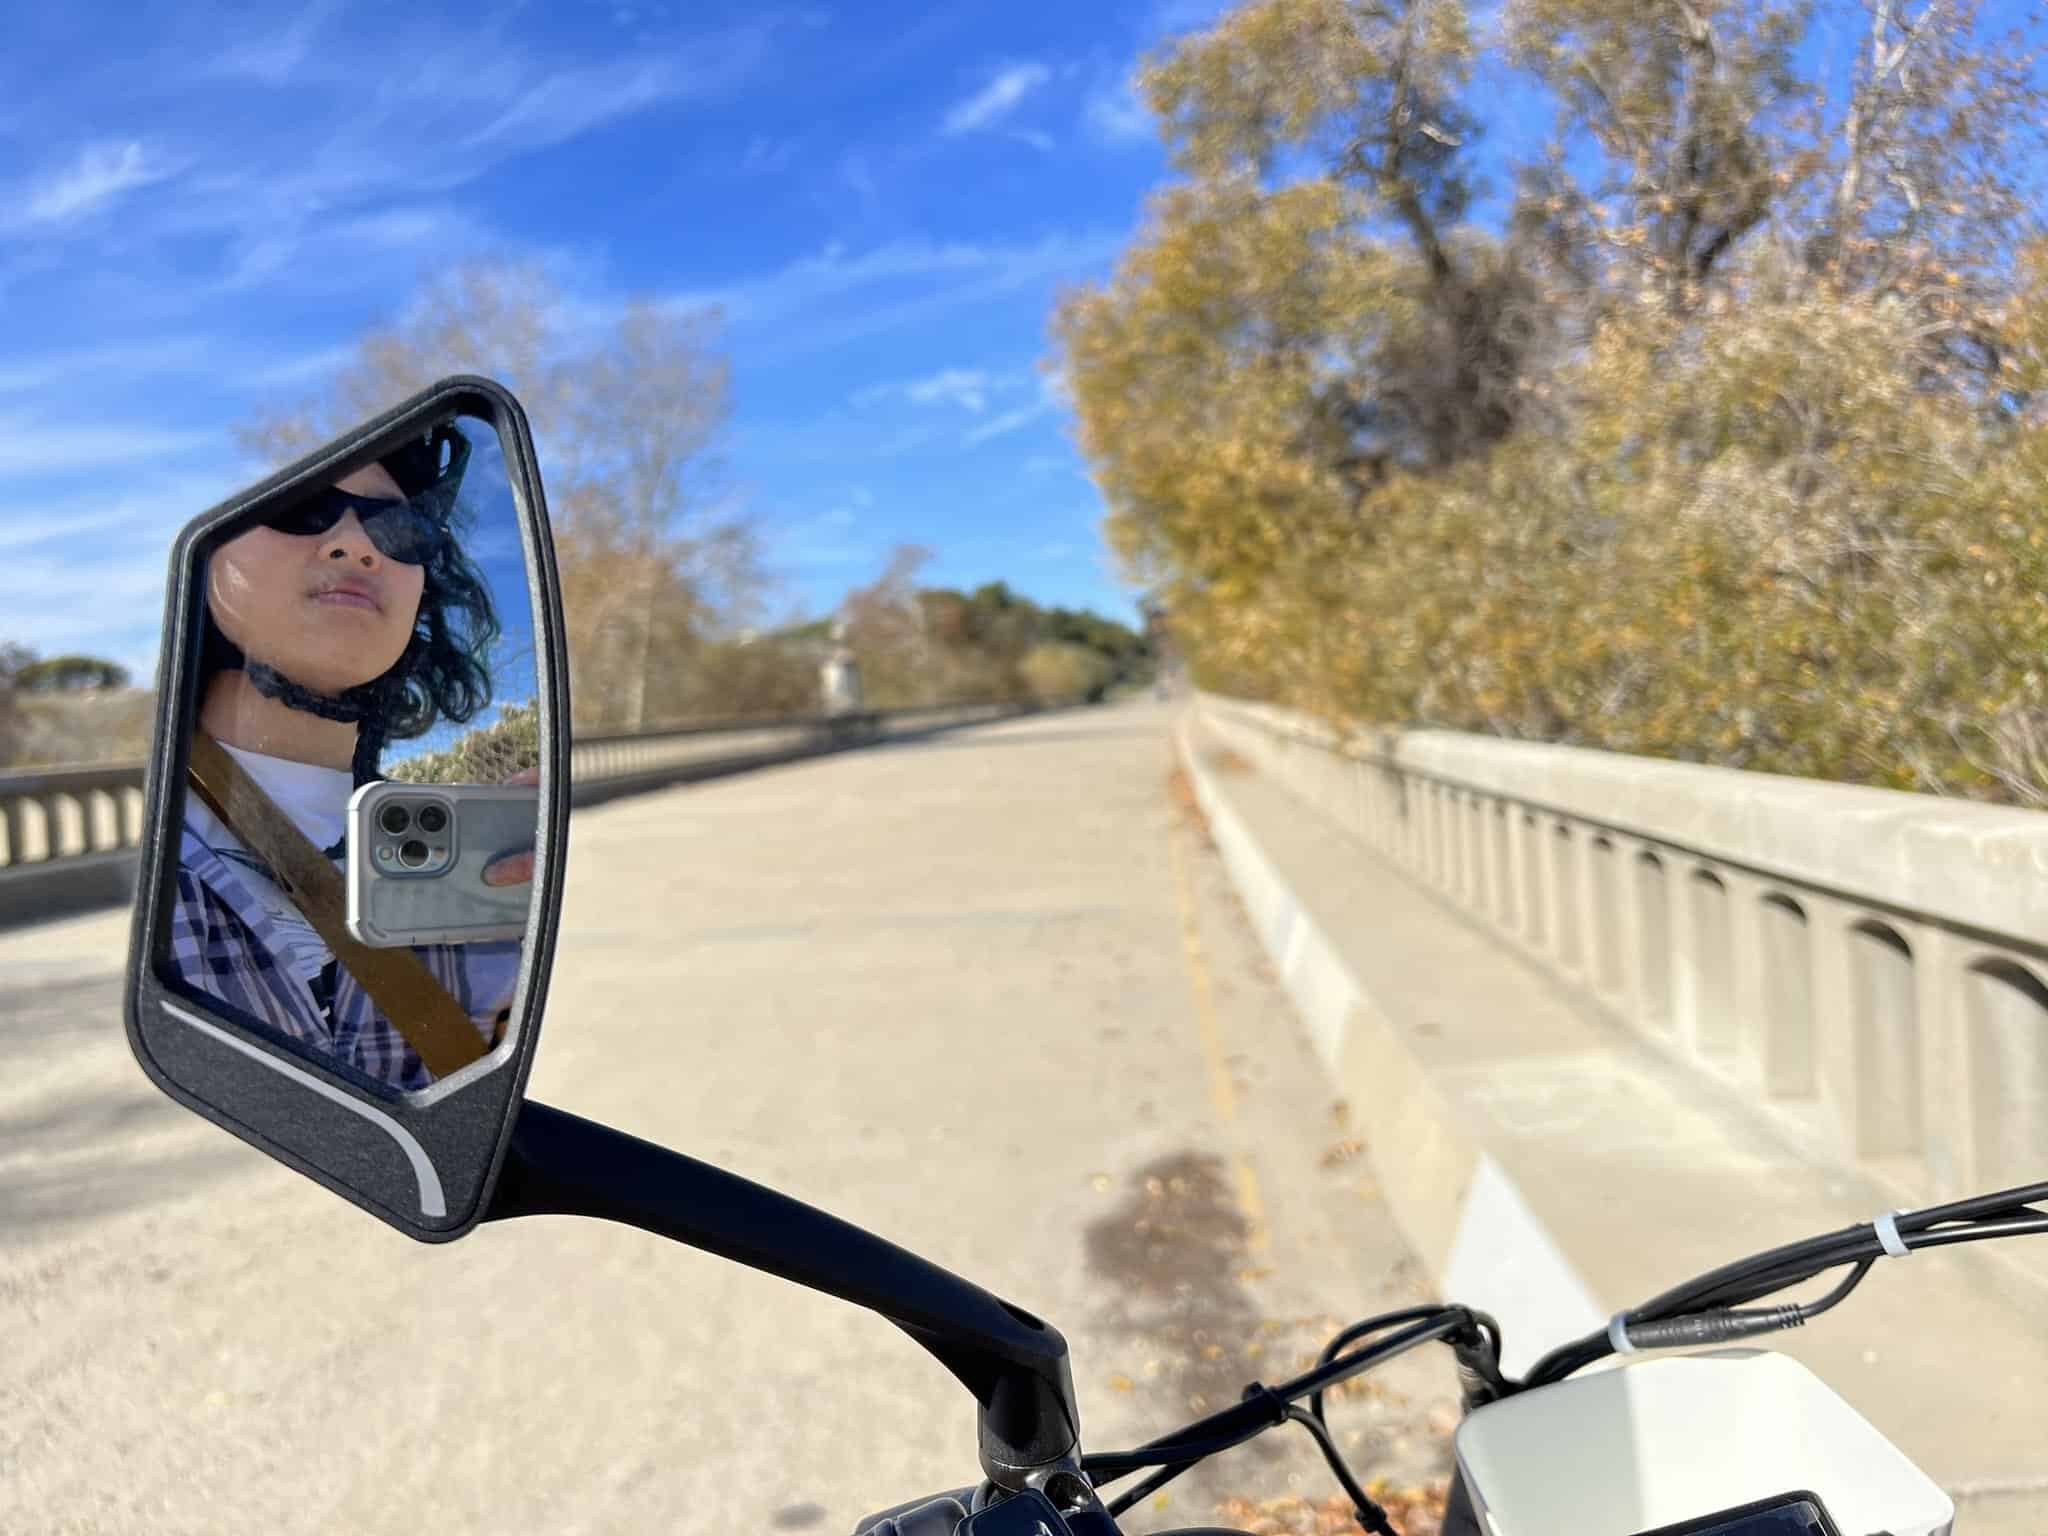 A highway with yellow trees on the side. A bicycle’s handlebars in the front of the picture. A bicycle’s rearview mirror with a reflection of Tech70/Meggie wearing blue plaid.